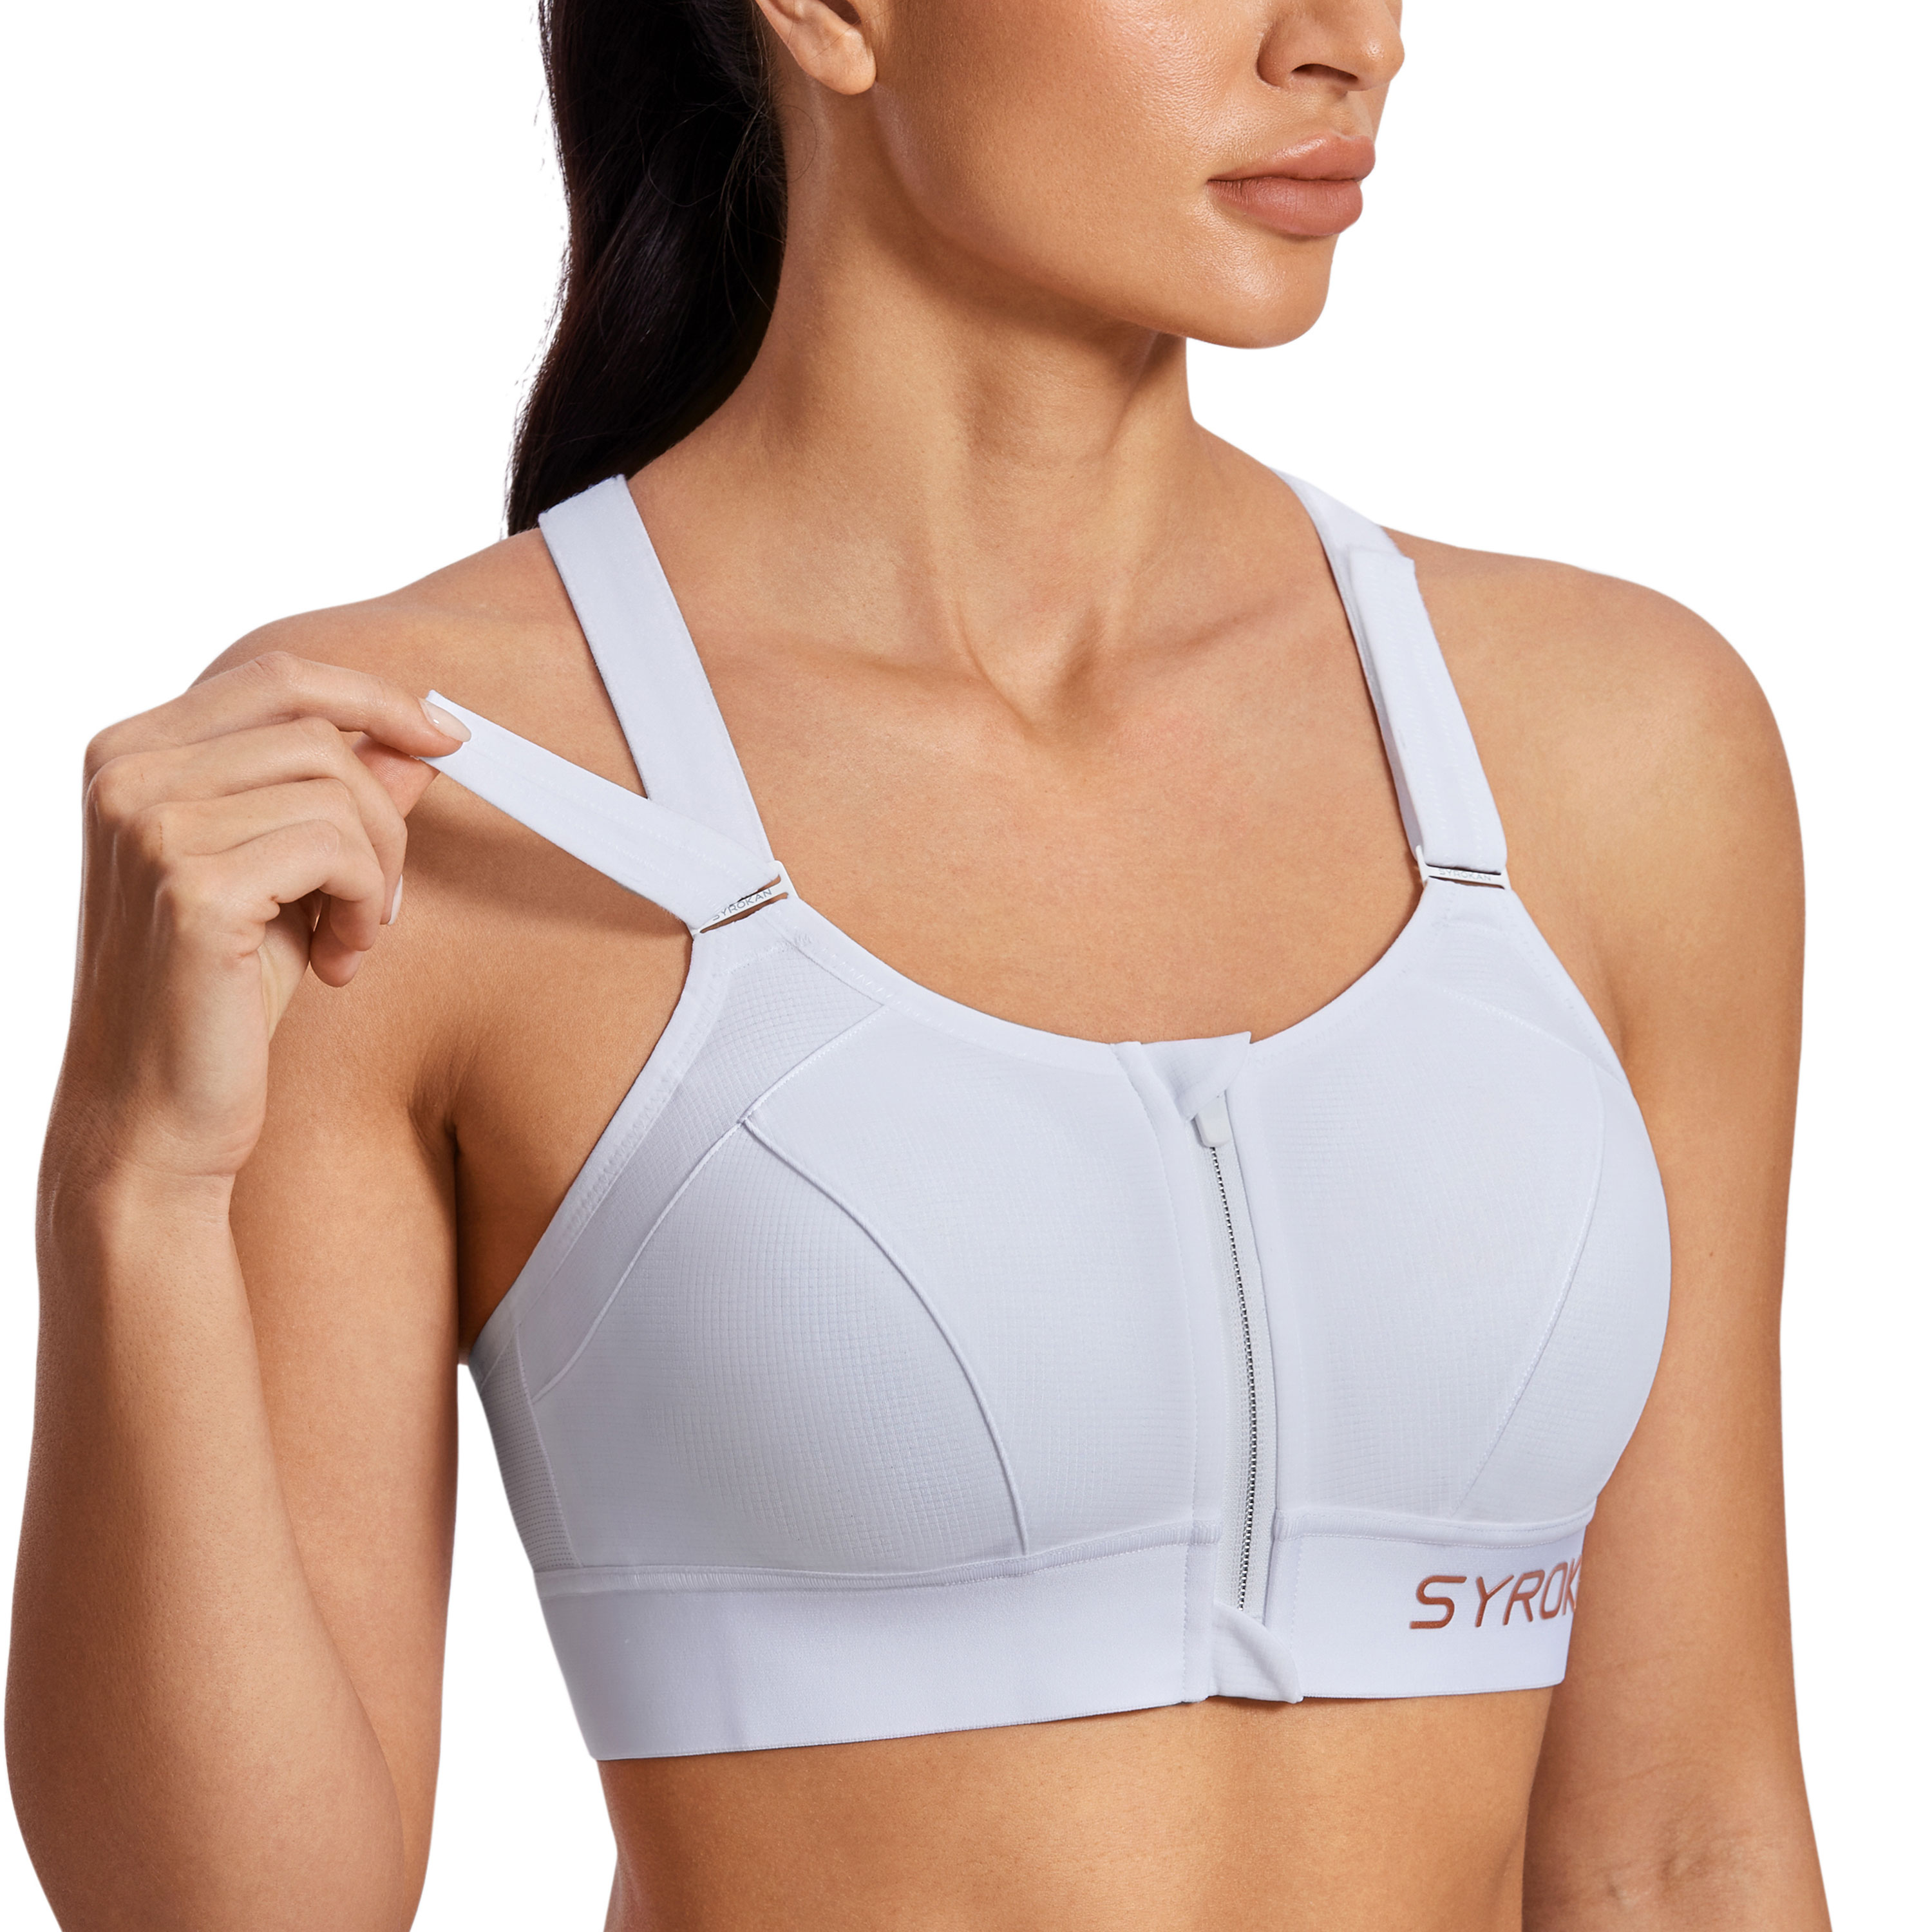 Syrokan Womens Size 38D Wirefree High Impact Max Support Sports